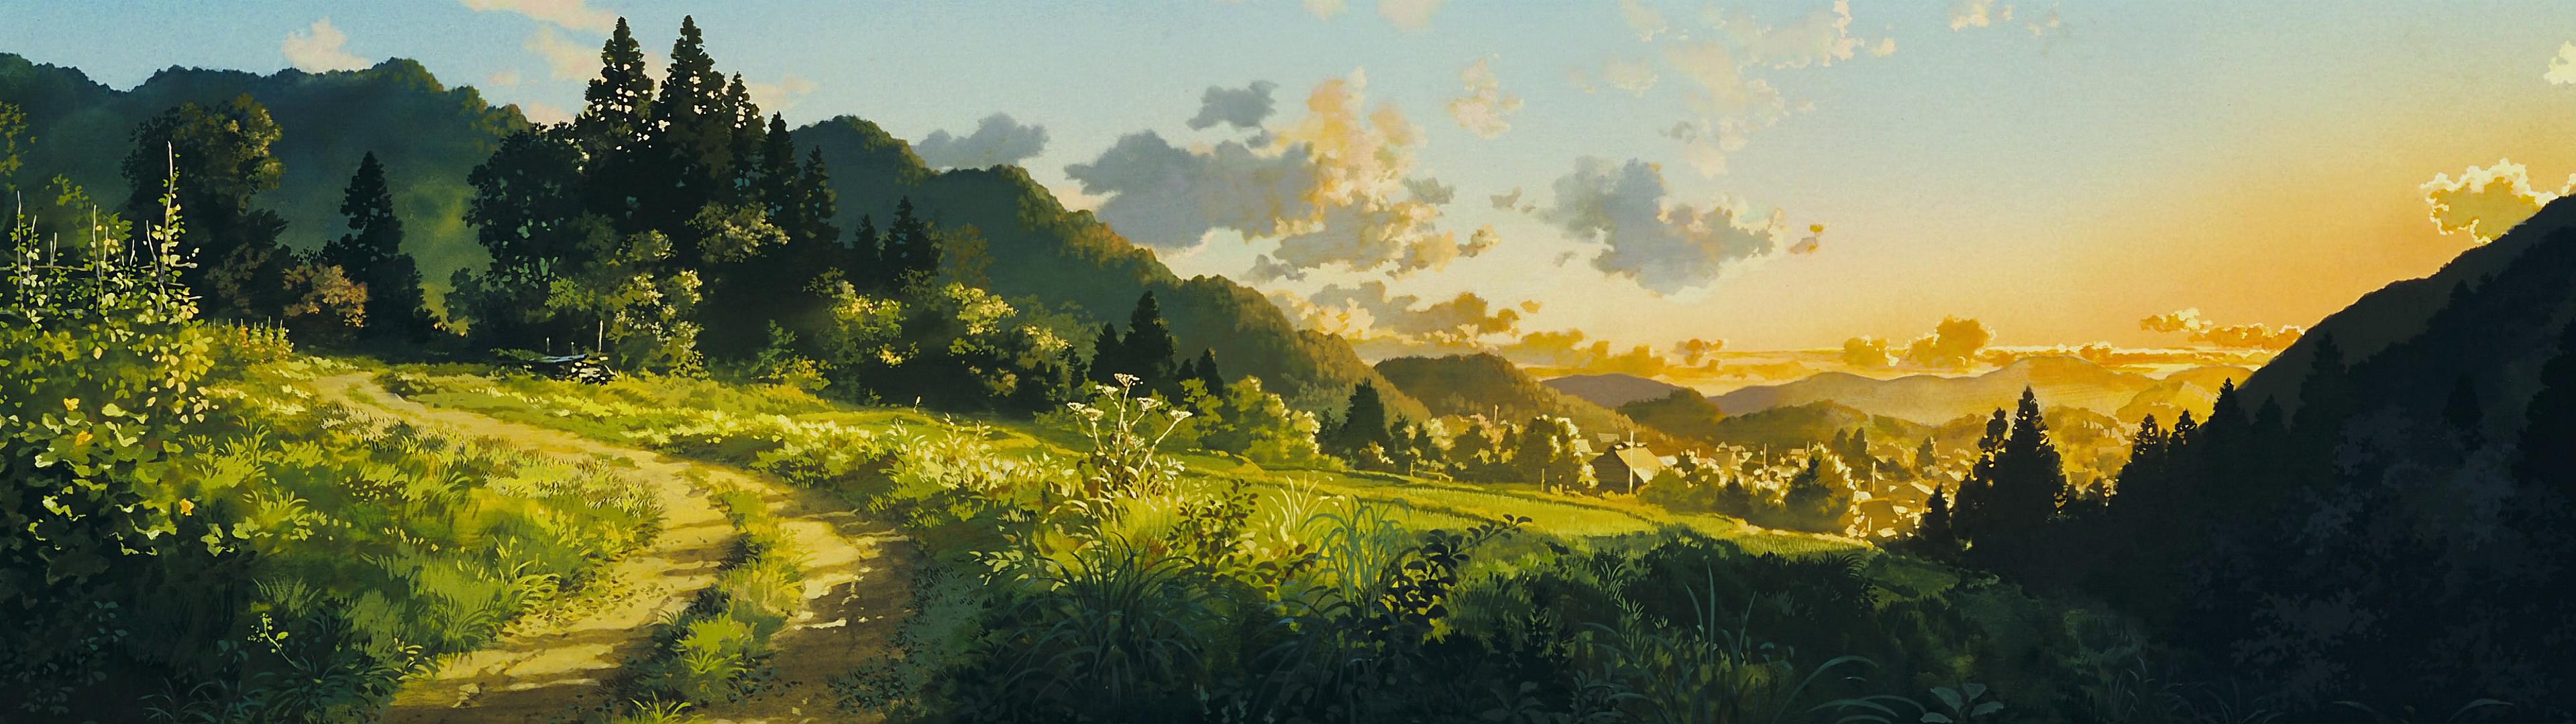 Ghibli double screen wallpapers | visual ioner